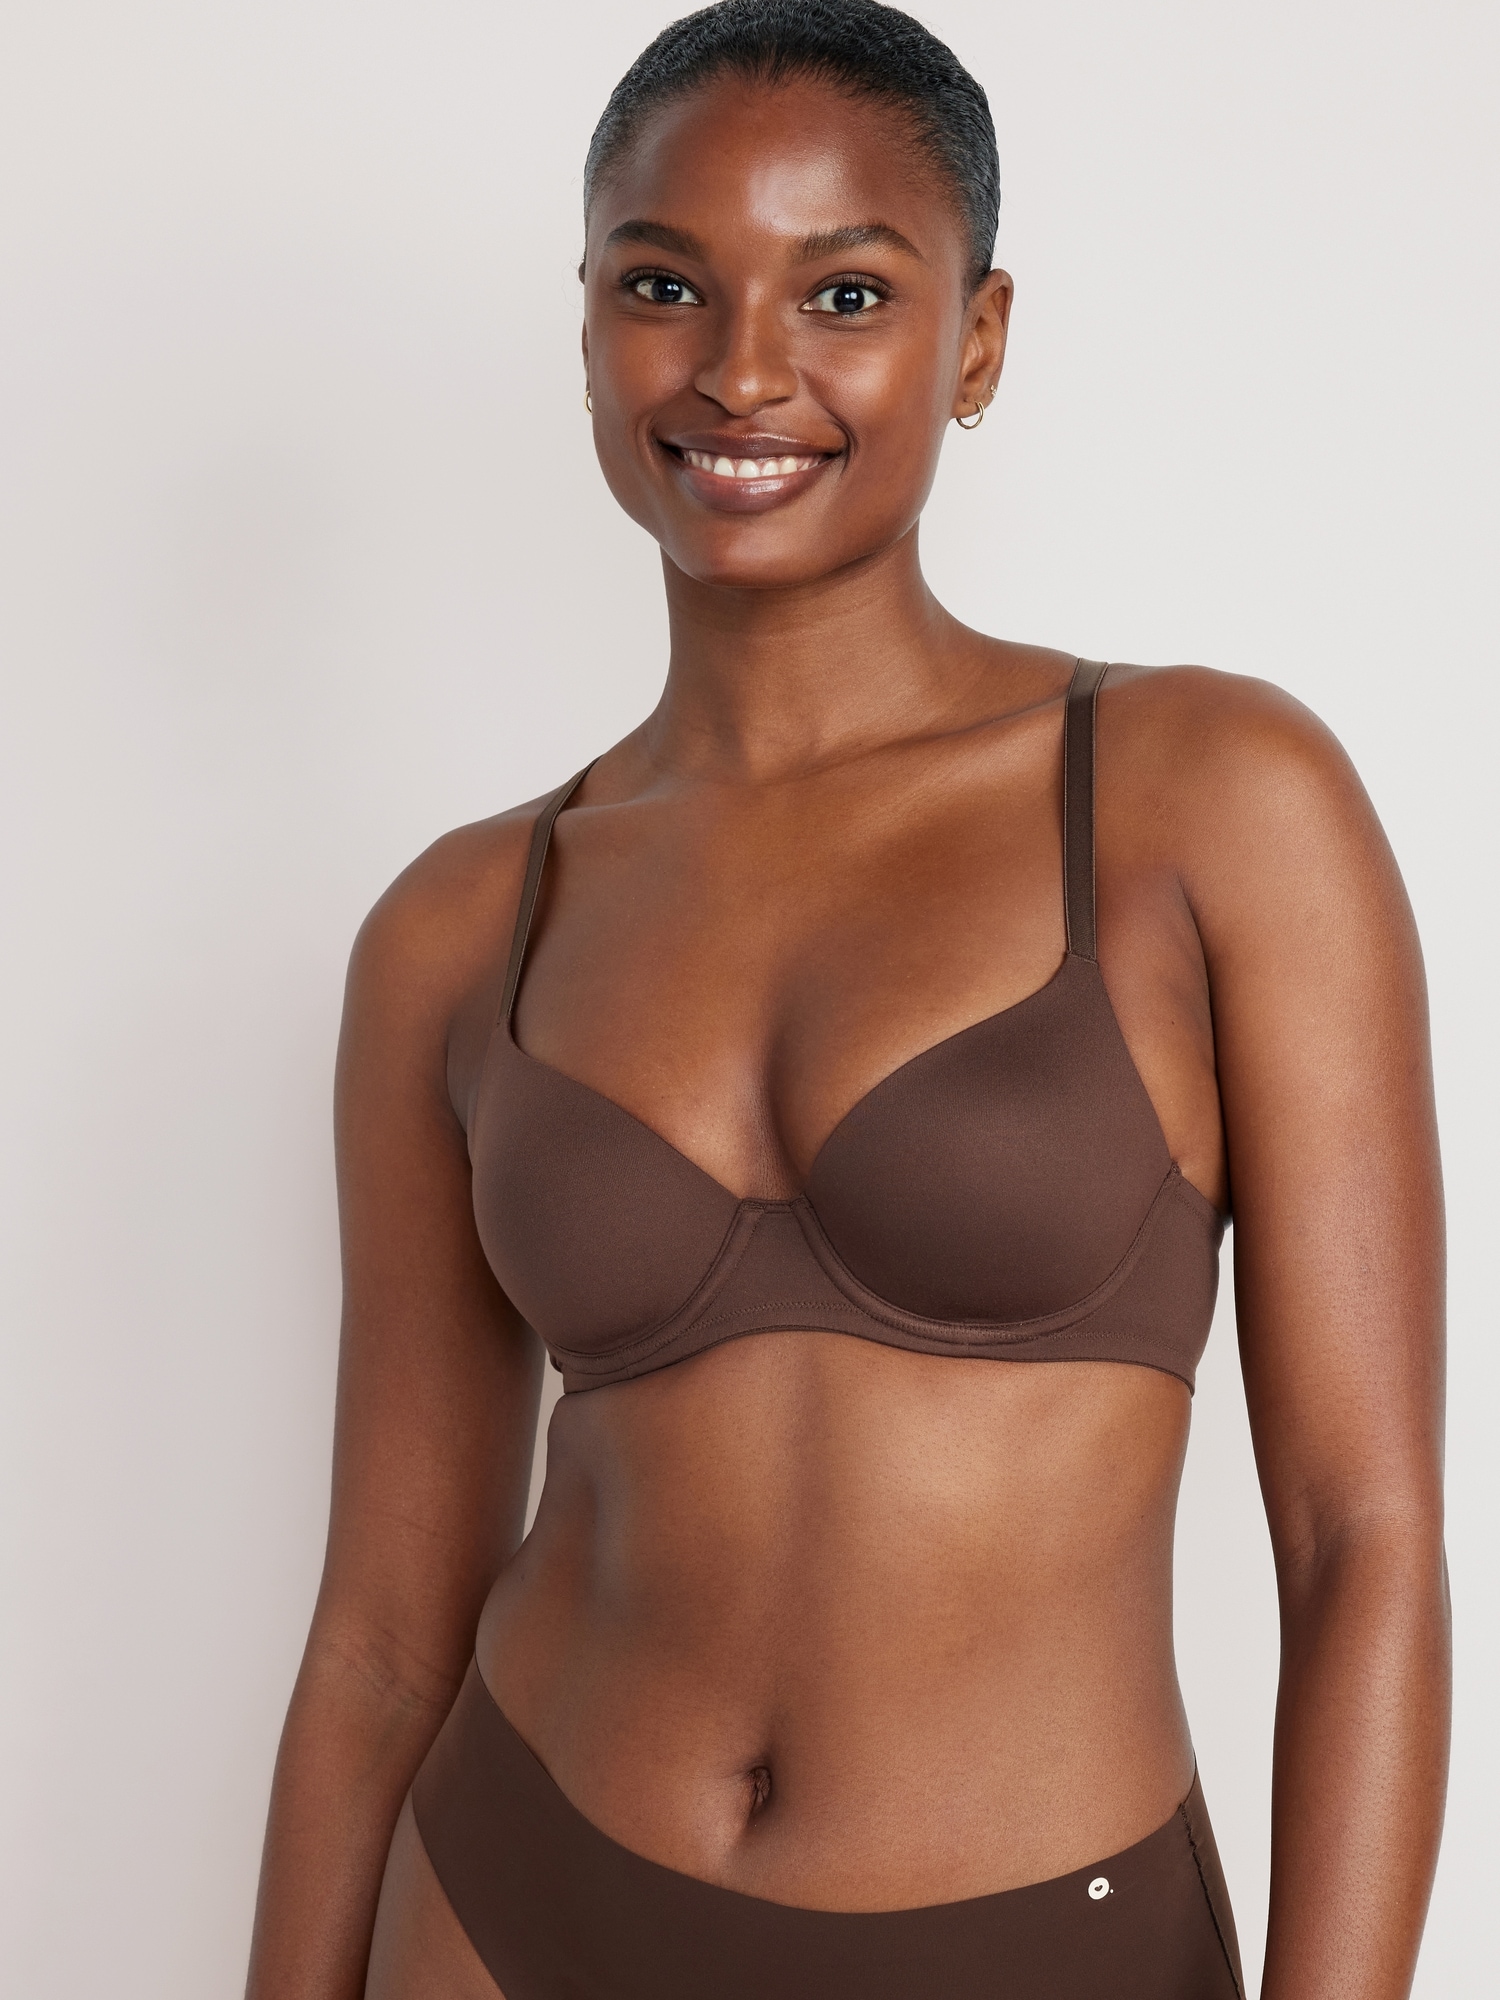 This is the only #Bra you will need! Its #fullcoverage it has #compres